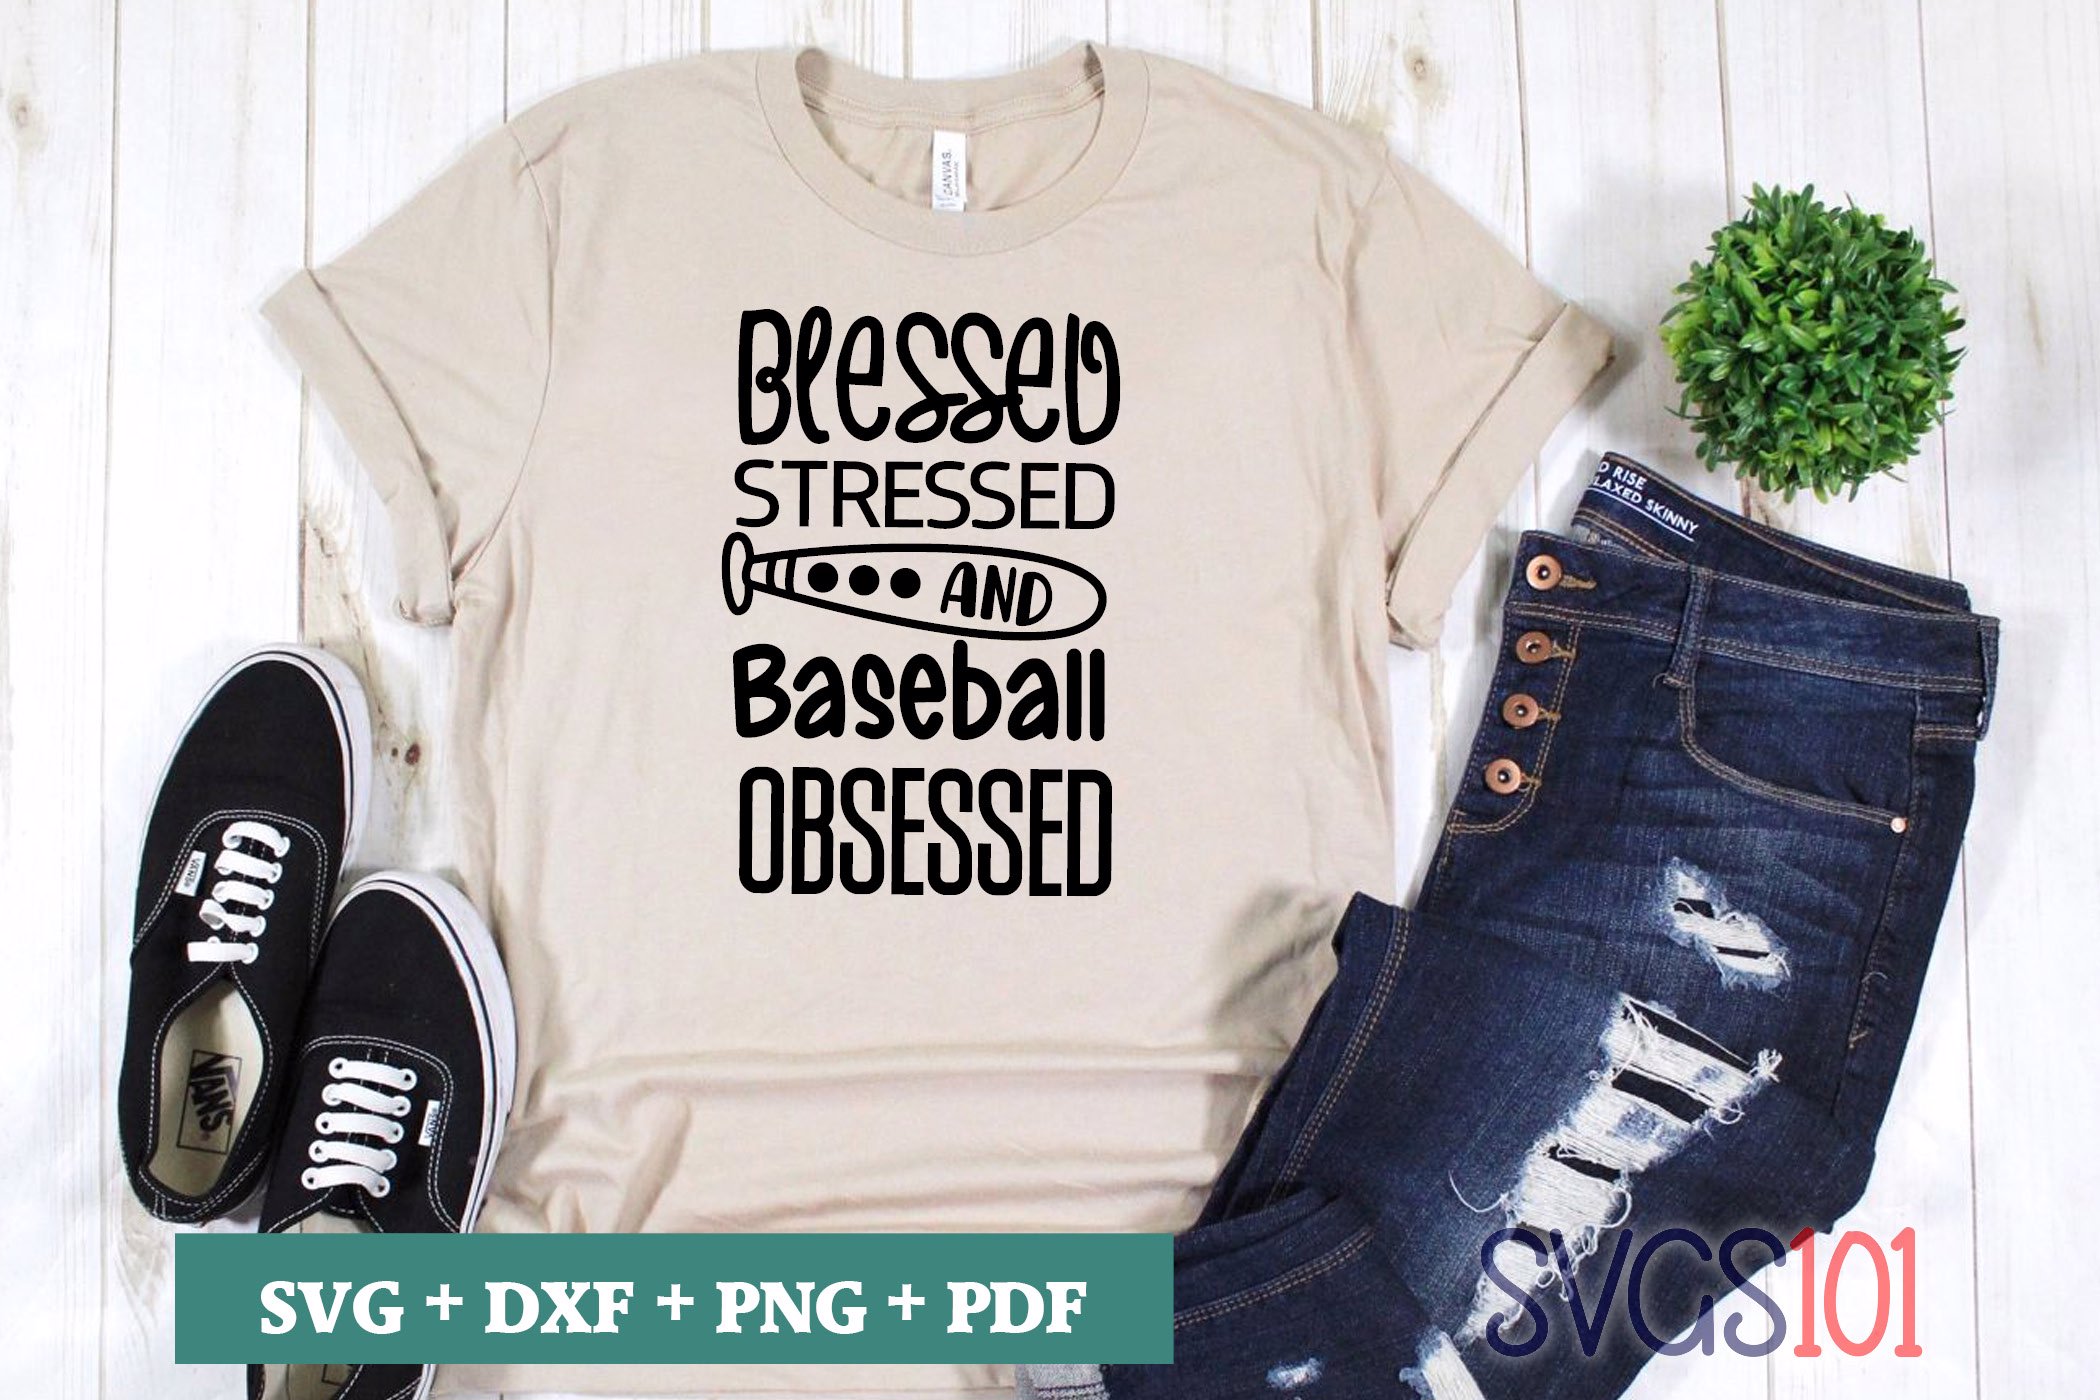 BLessed Stressed and Baseball Obsessed